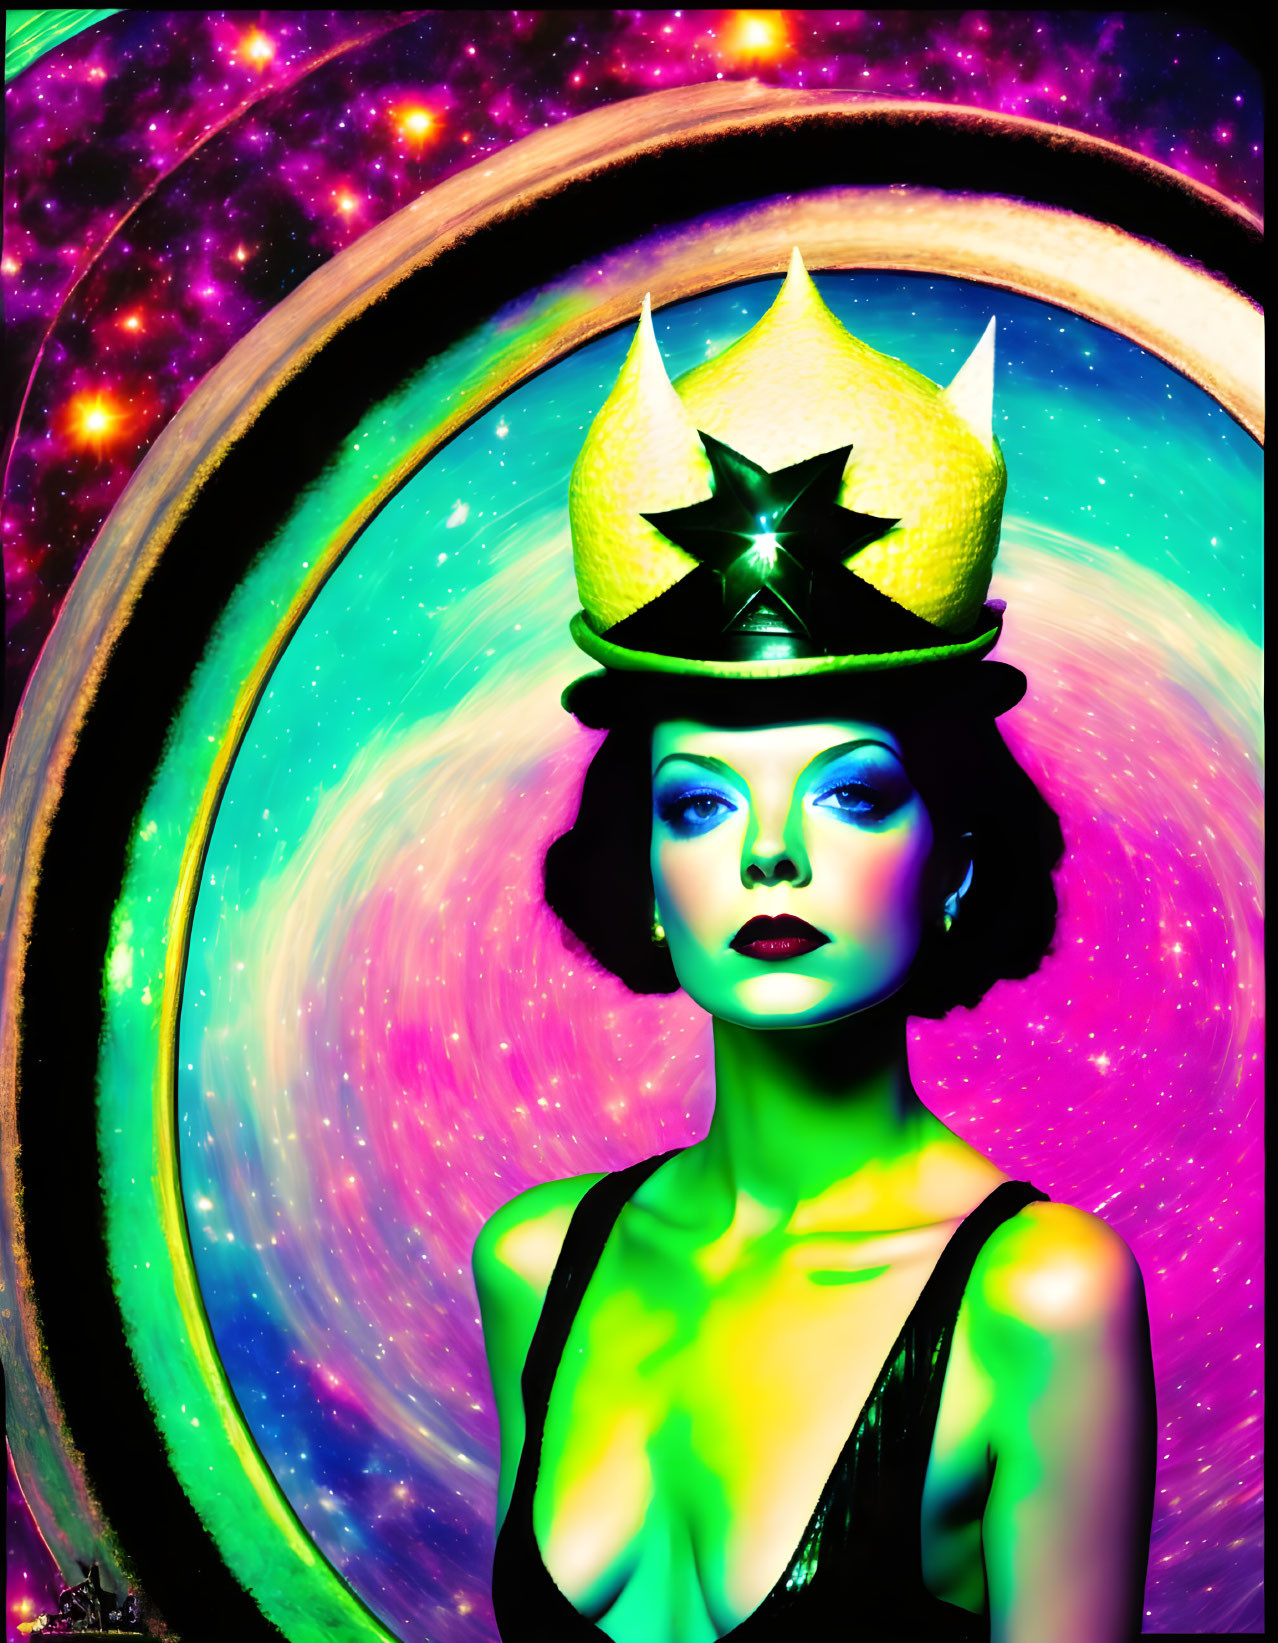 Portrait of woman with cosmic background and golden crown in circular frame